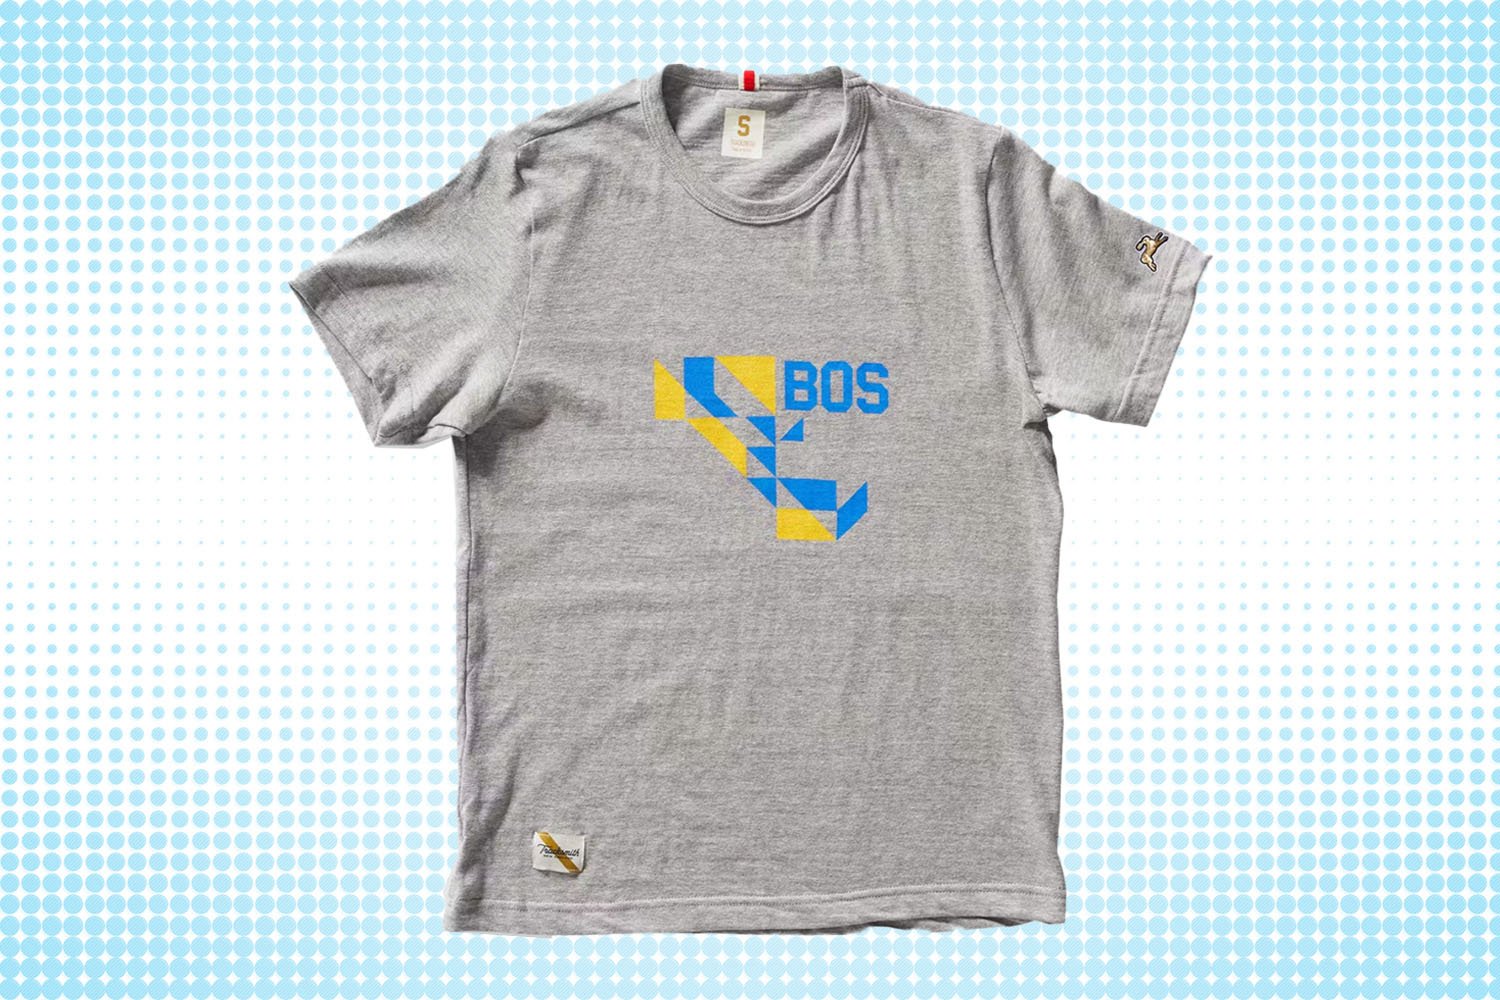 a grey short sleeve tee with "BOS" graphic from Tracksmith on a white and blue dotted background